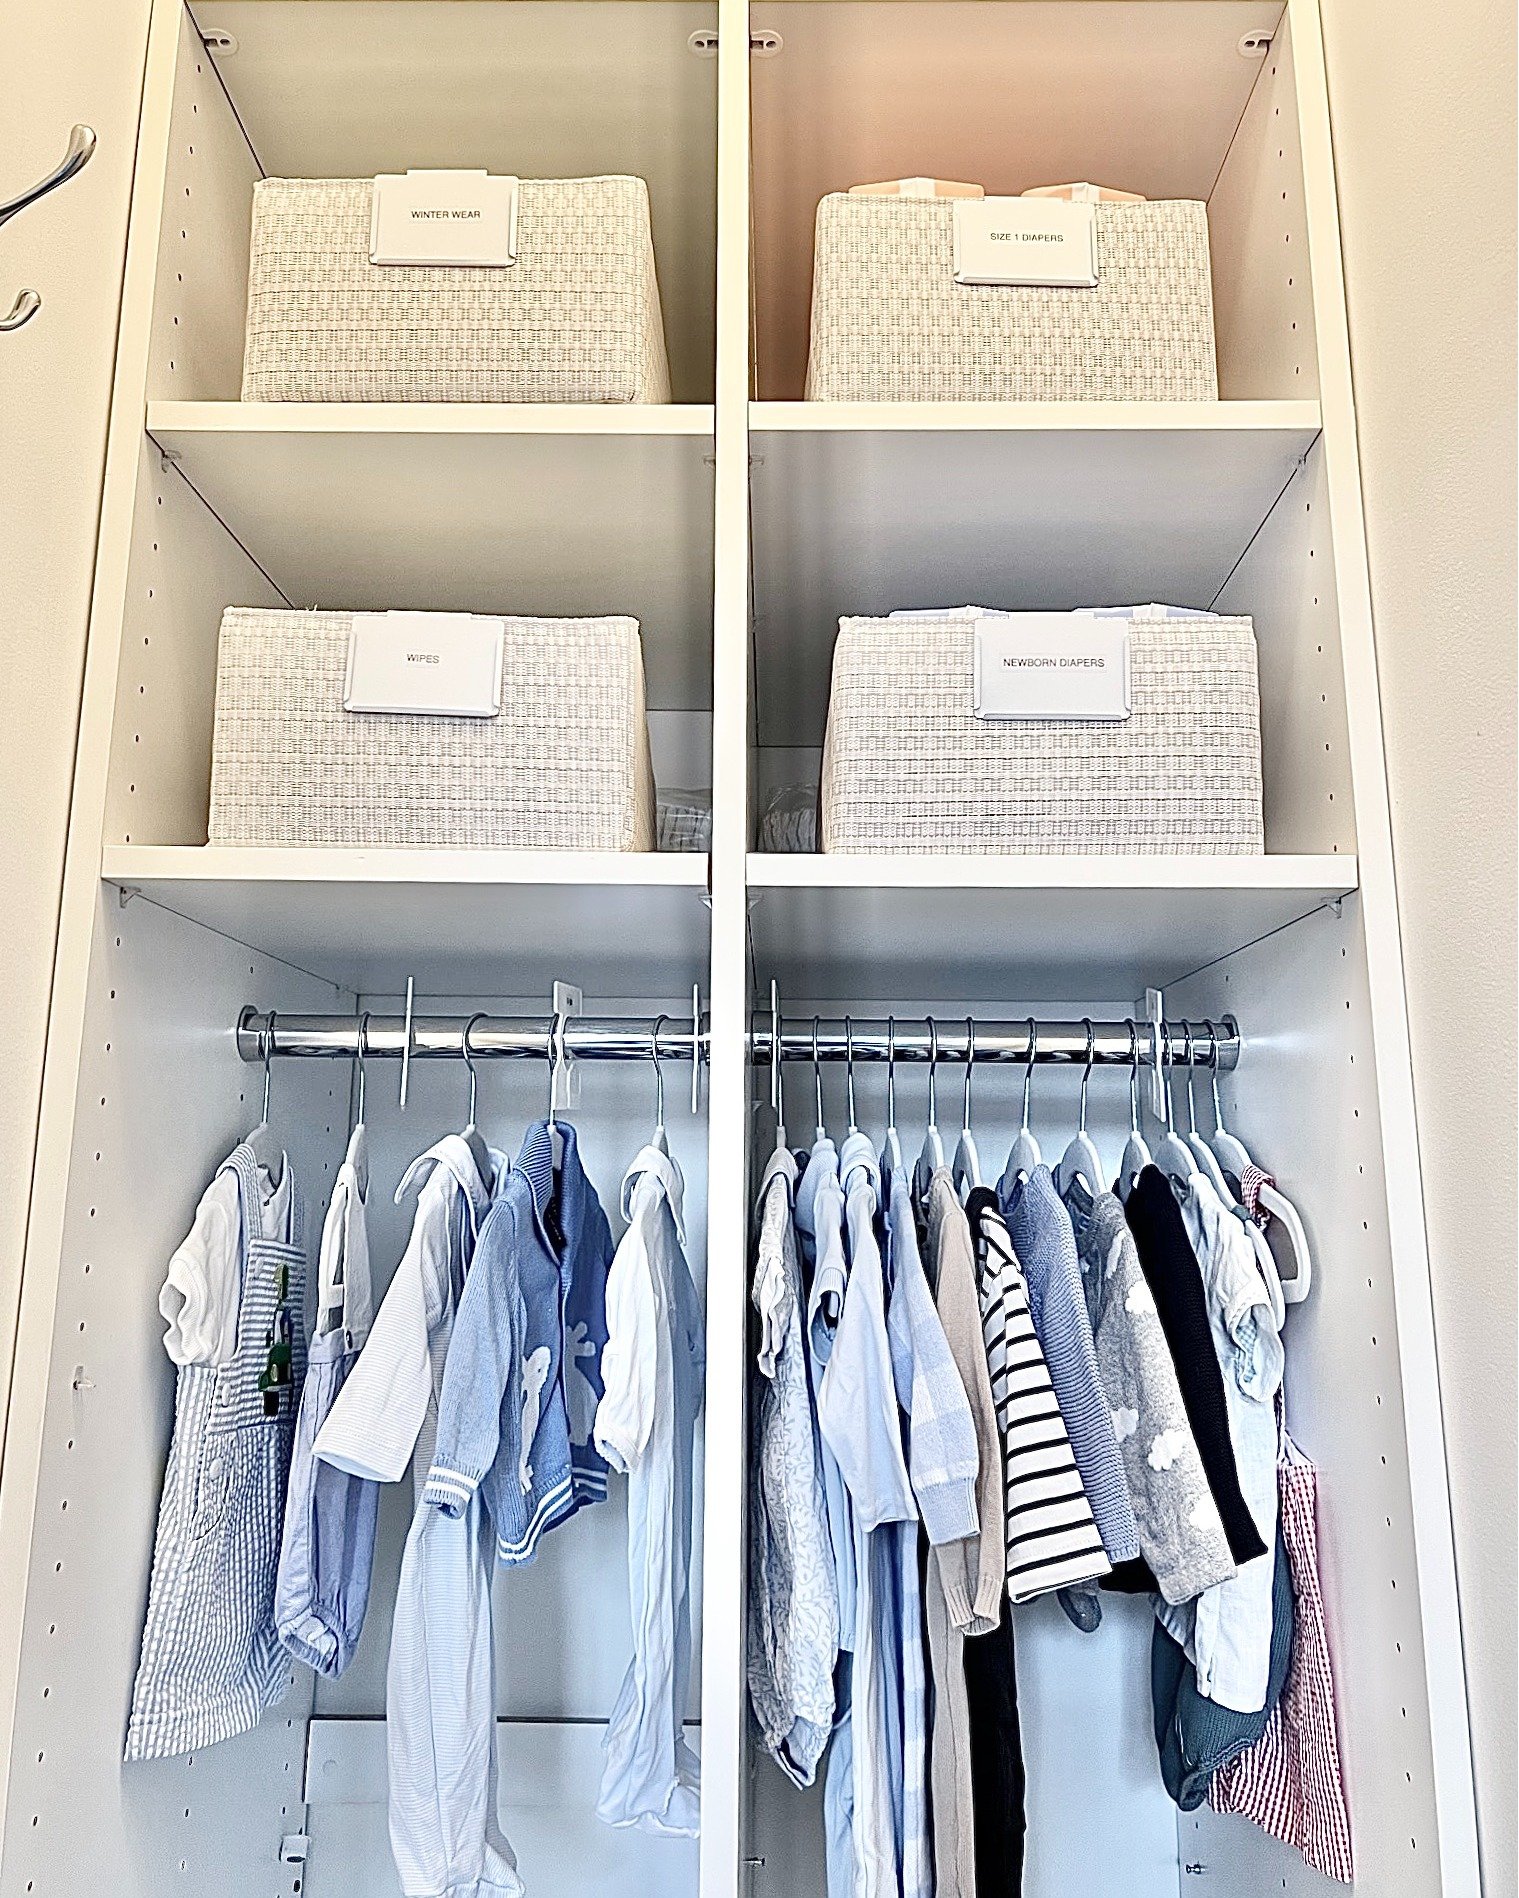 SWOON TIP:
When setting up your nursery, make sure you have a system for outgrown and to grow into clothes!

Your little bundle of joy will grow faster than you can believe so setting up a practical and smooth system to swap in/out their clothes and 